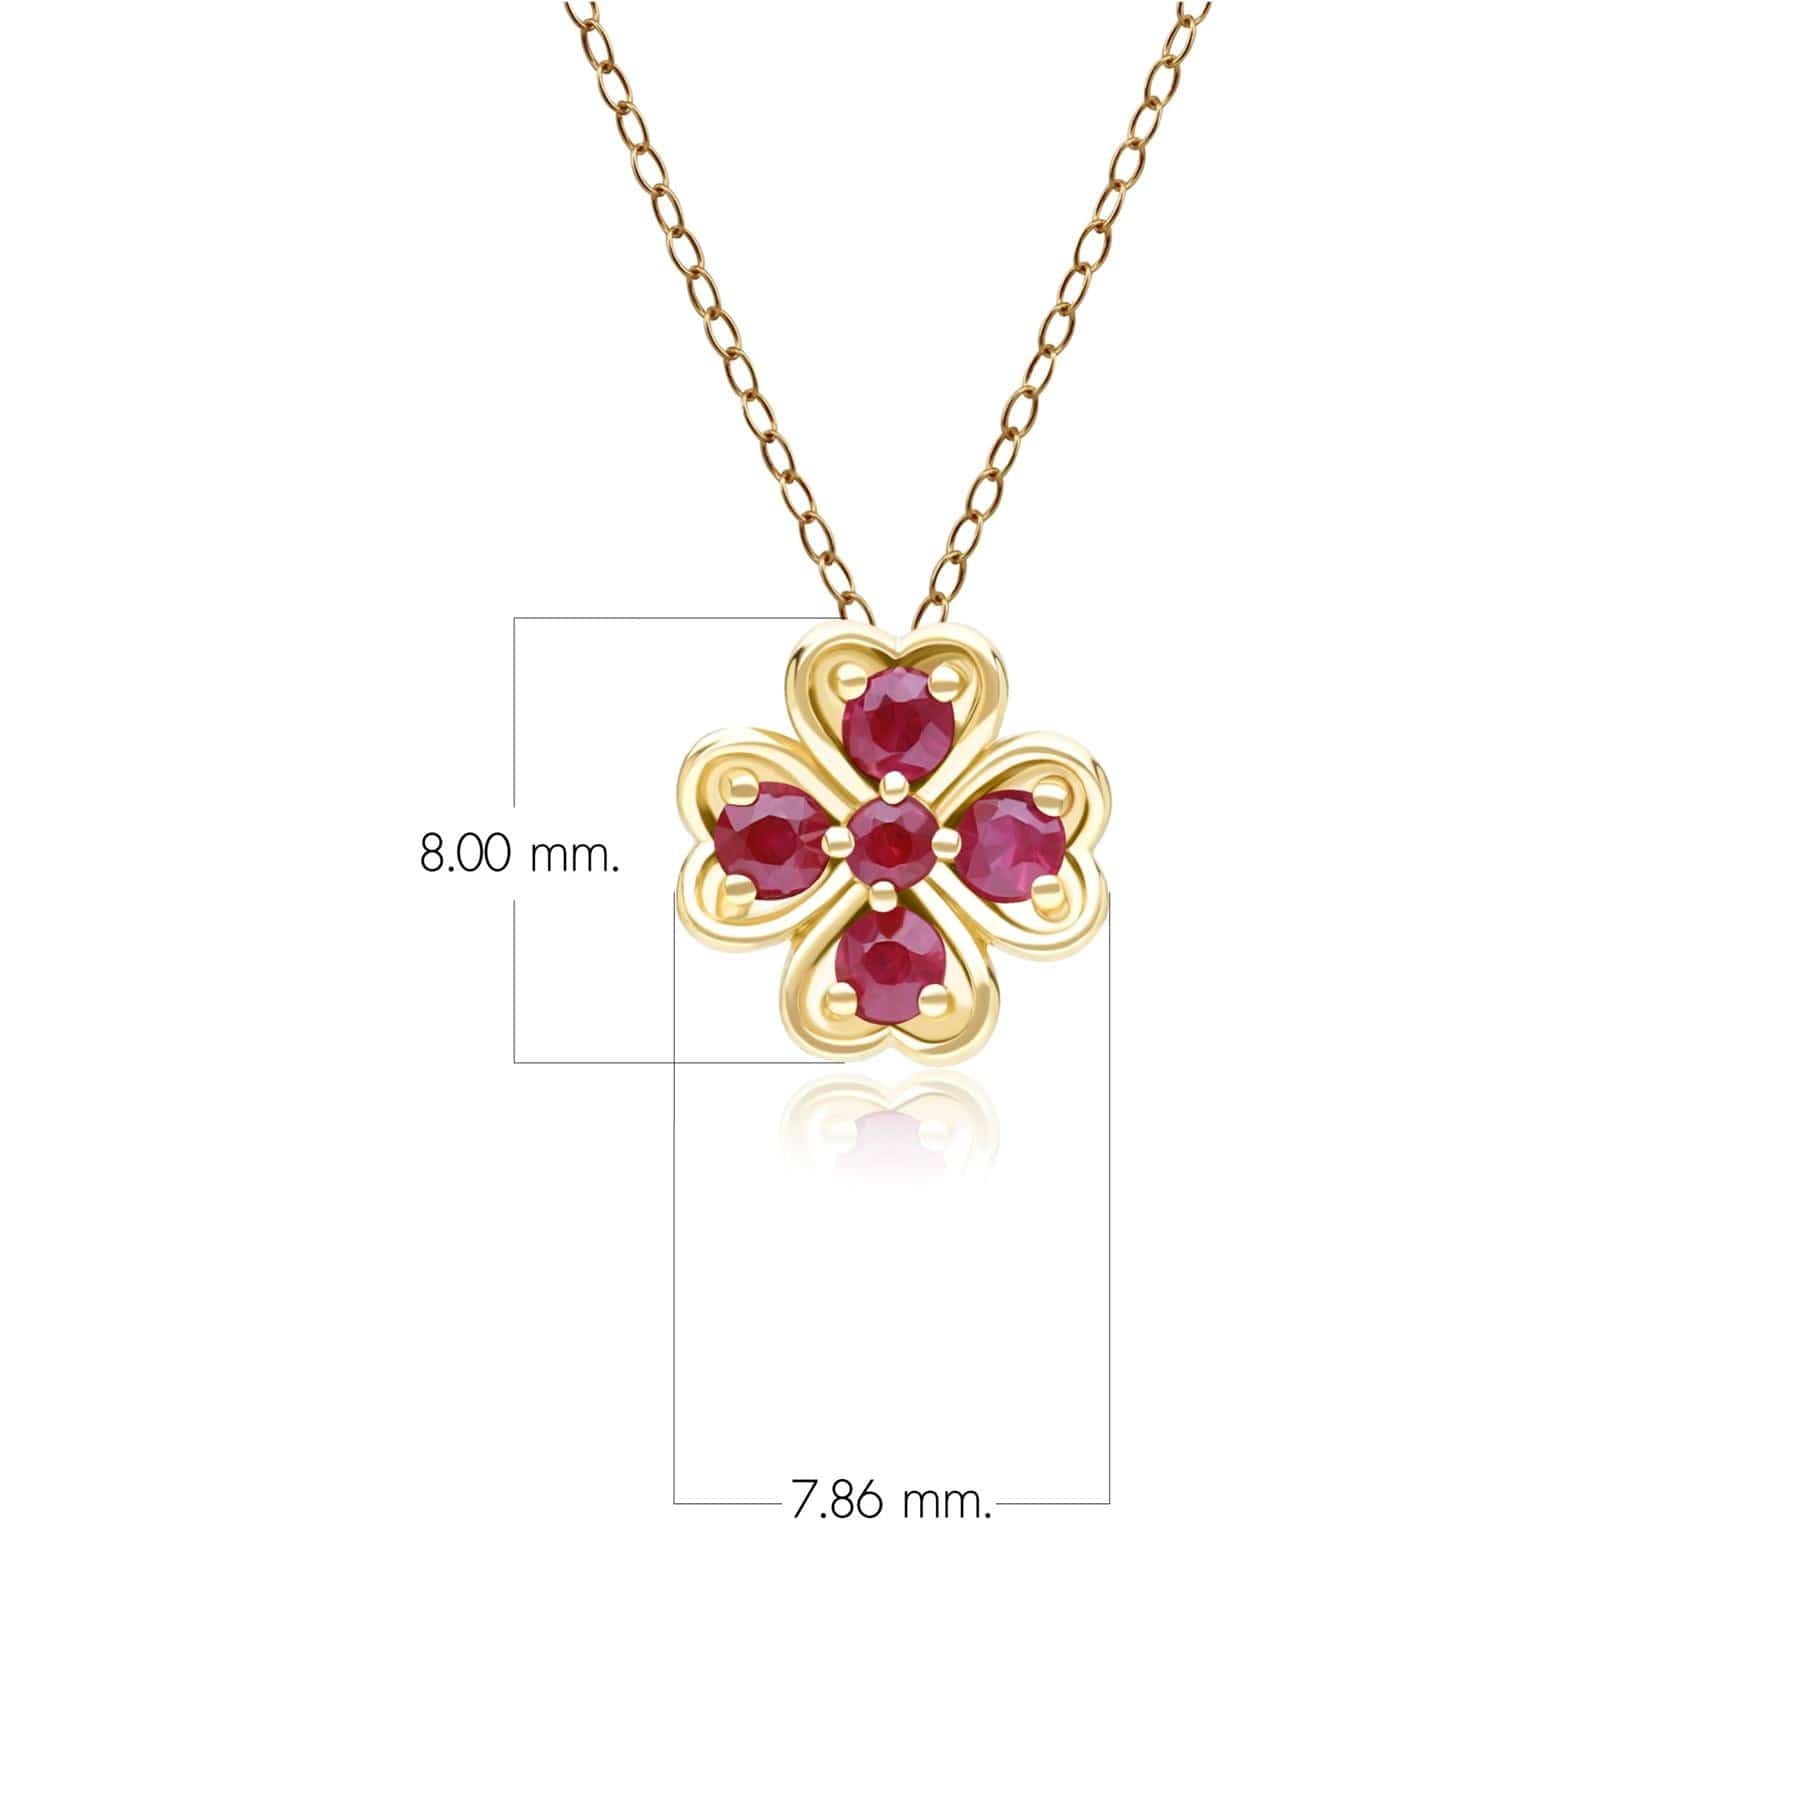 135P2127019 Gardenia Round Ruby Clover Pendant Necklace in 9ct Yellow Gold Dimensions